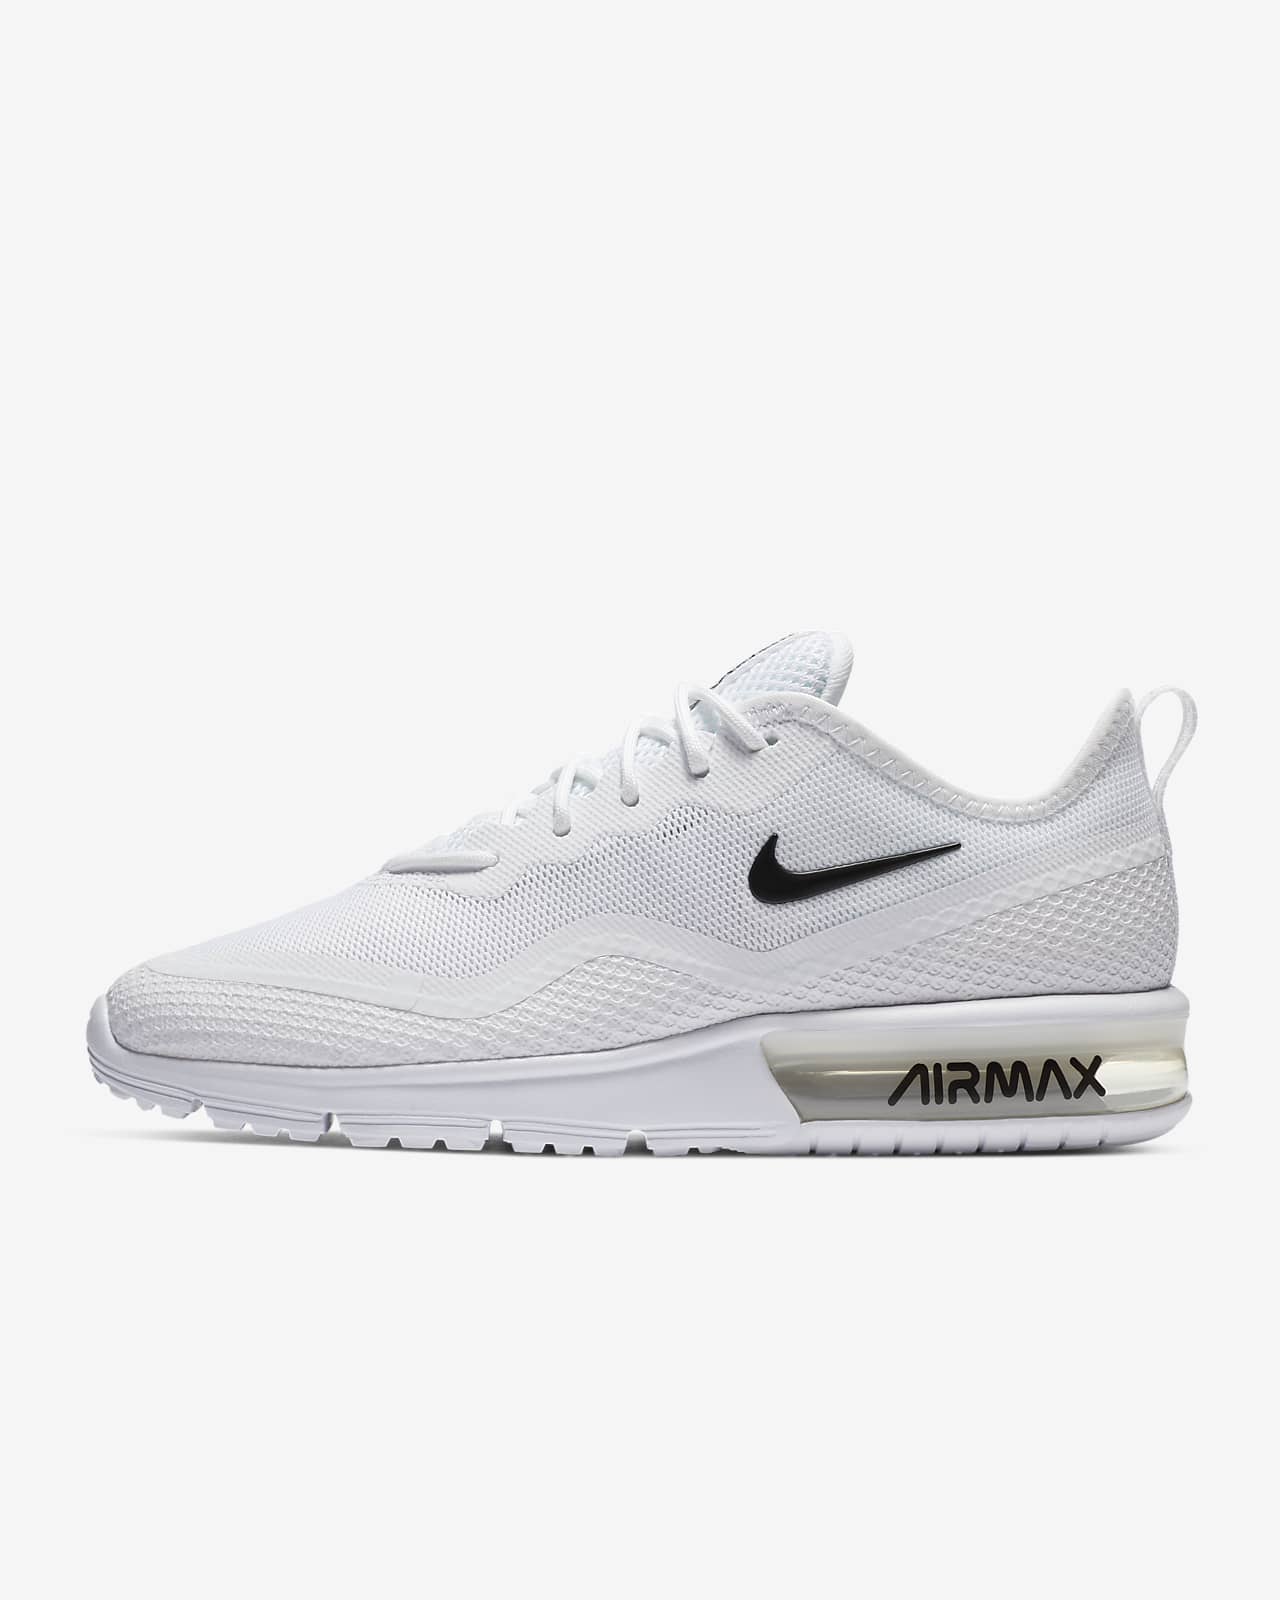 zapatillas nike air max sequent mujer